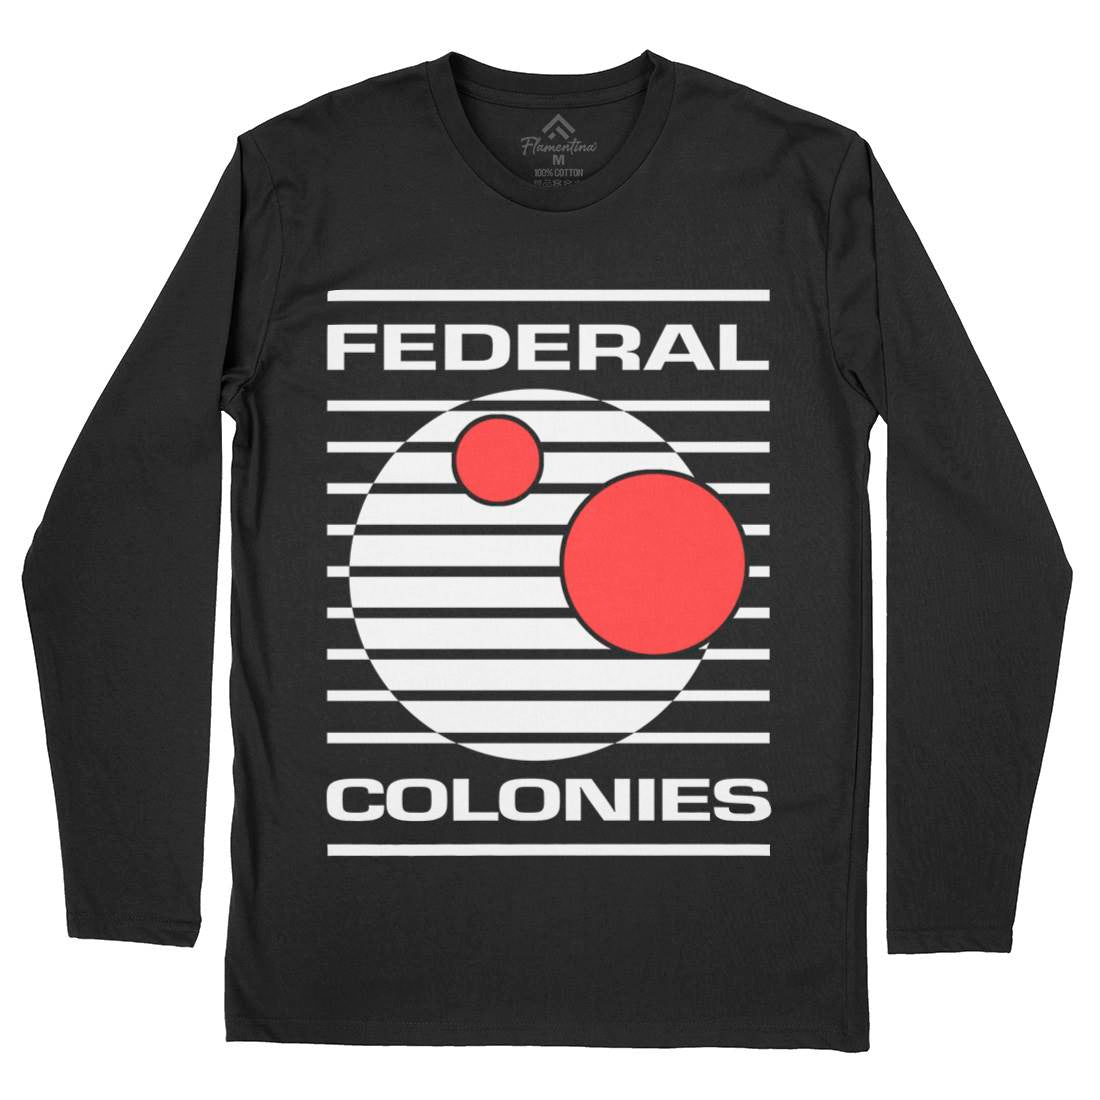 Federal Colonies Mens Long Sleeve T-Shirt Space D409